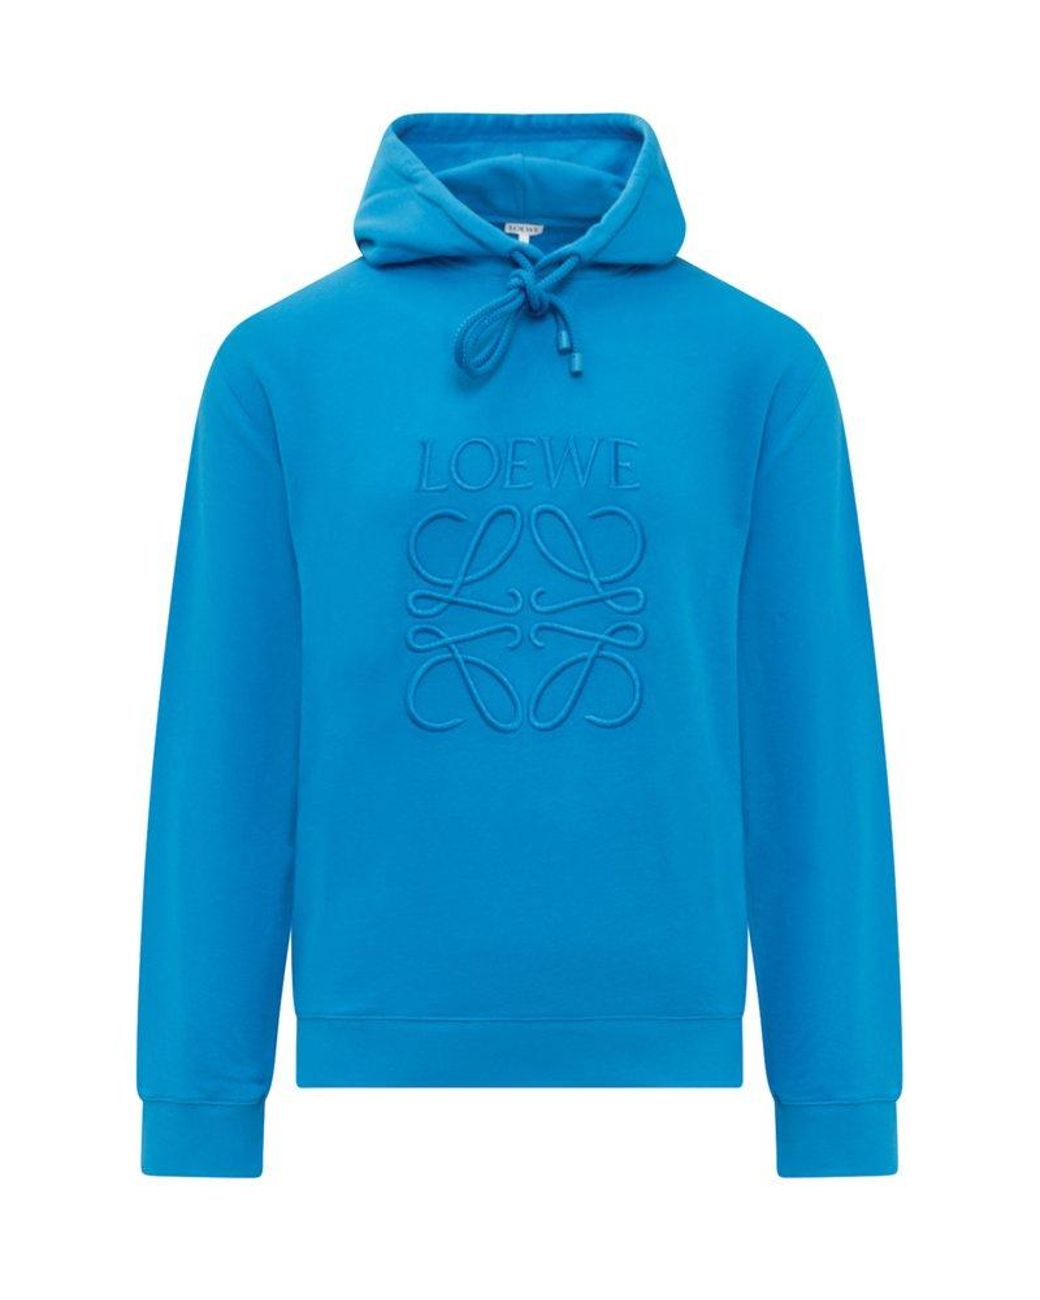 Louis Vuitton Brand Logo Printed Blue Hoodie And Pants - TAGOTEE